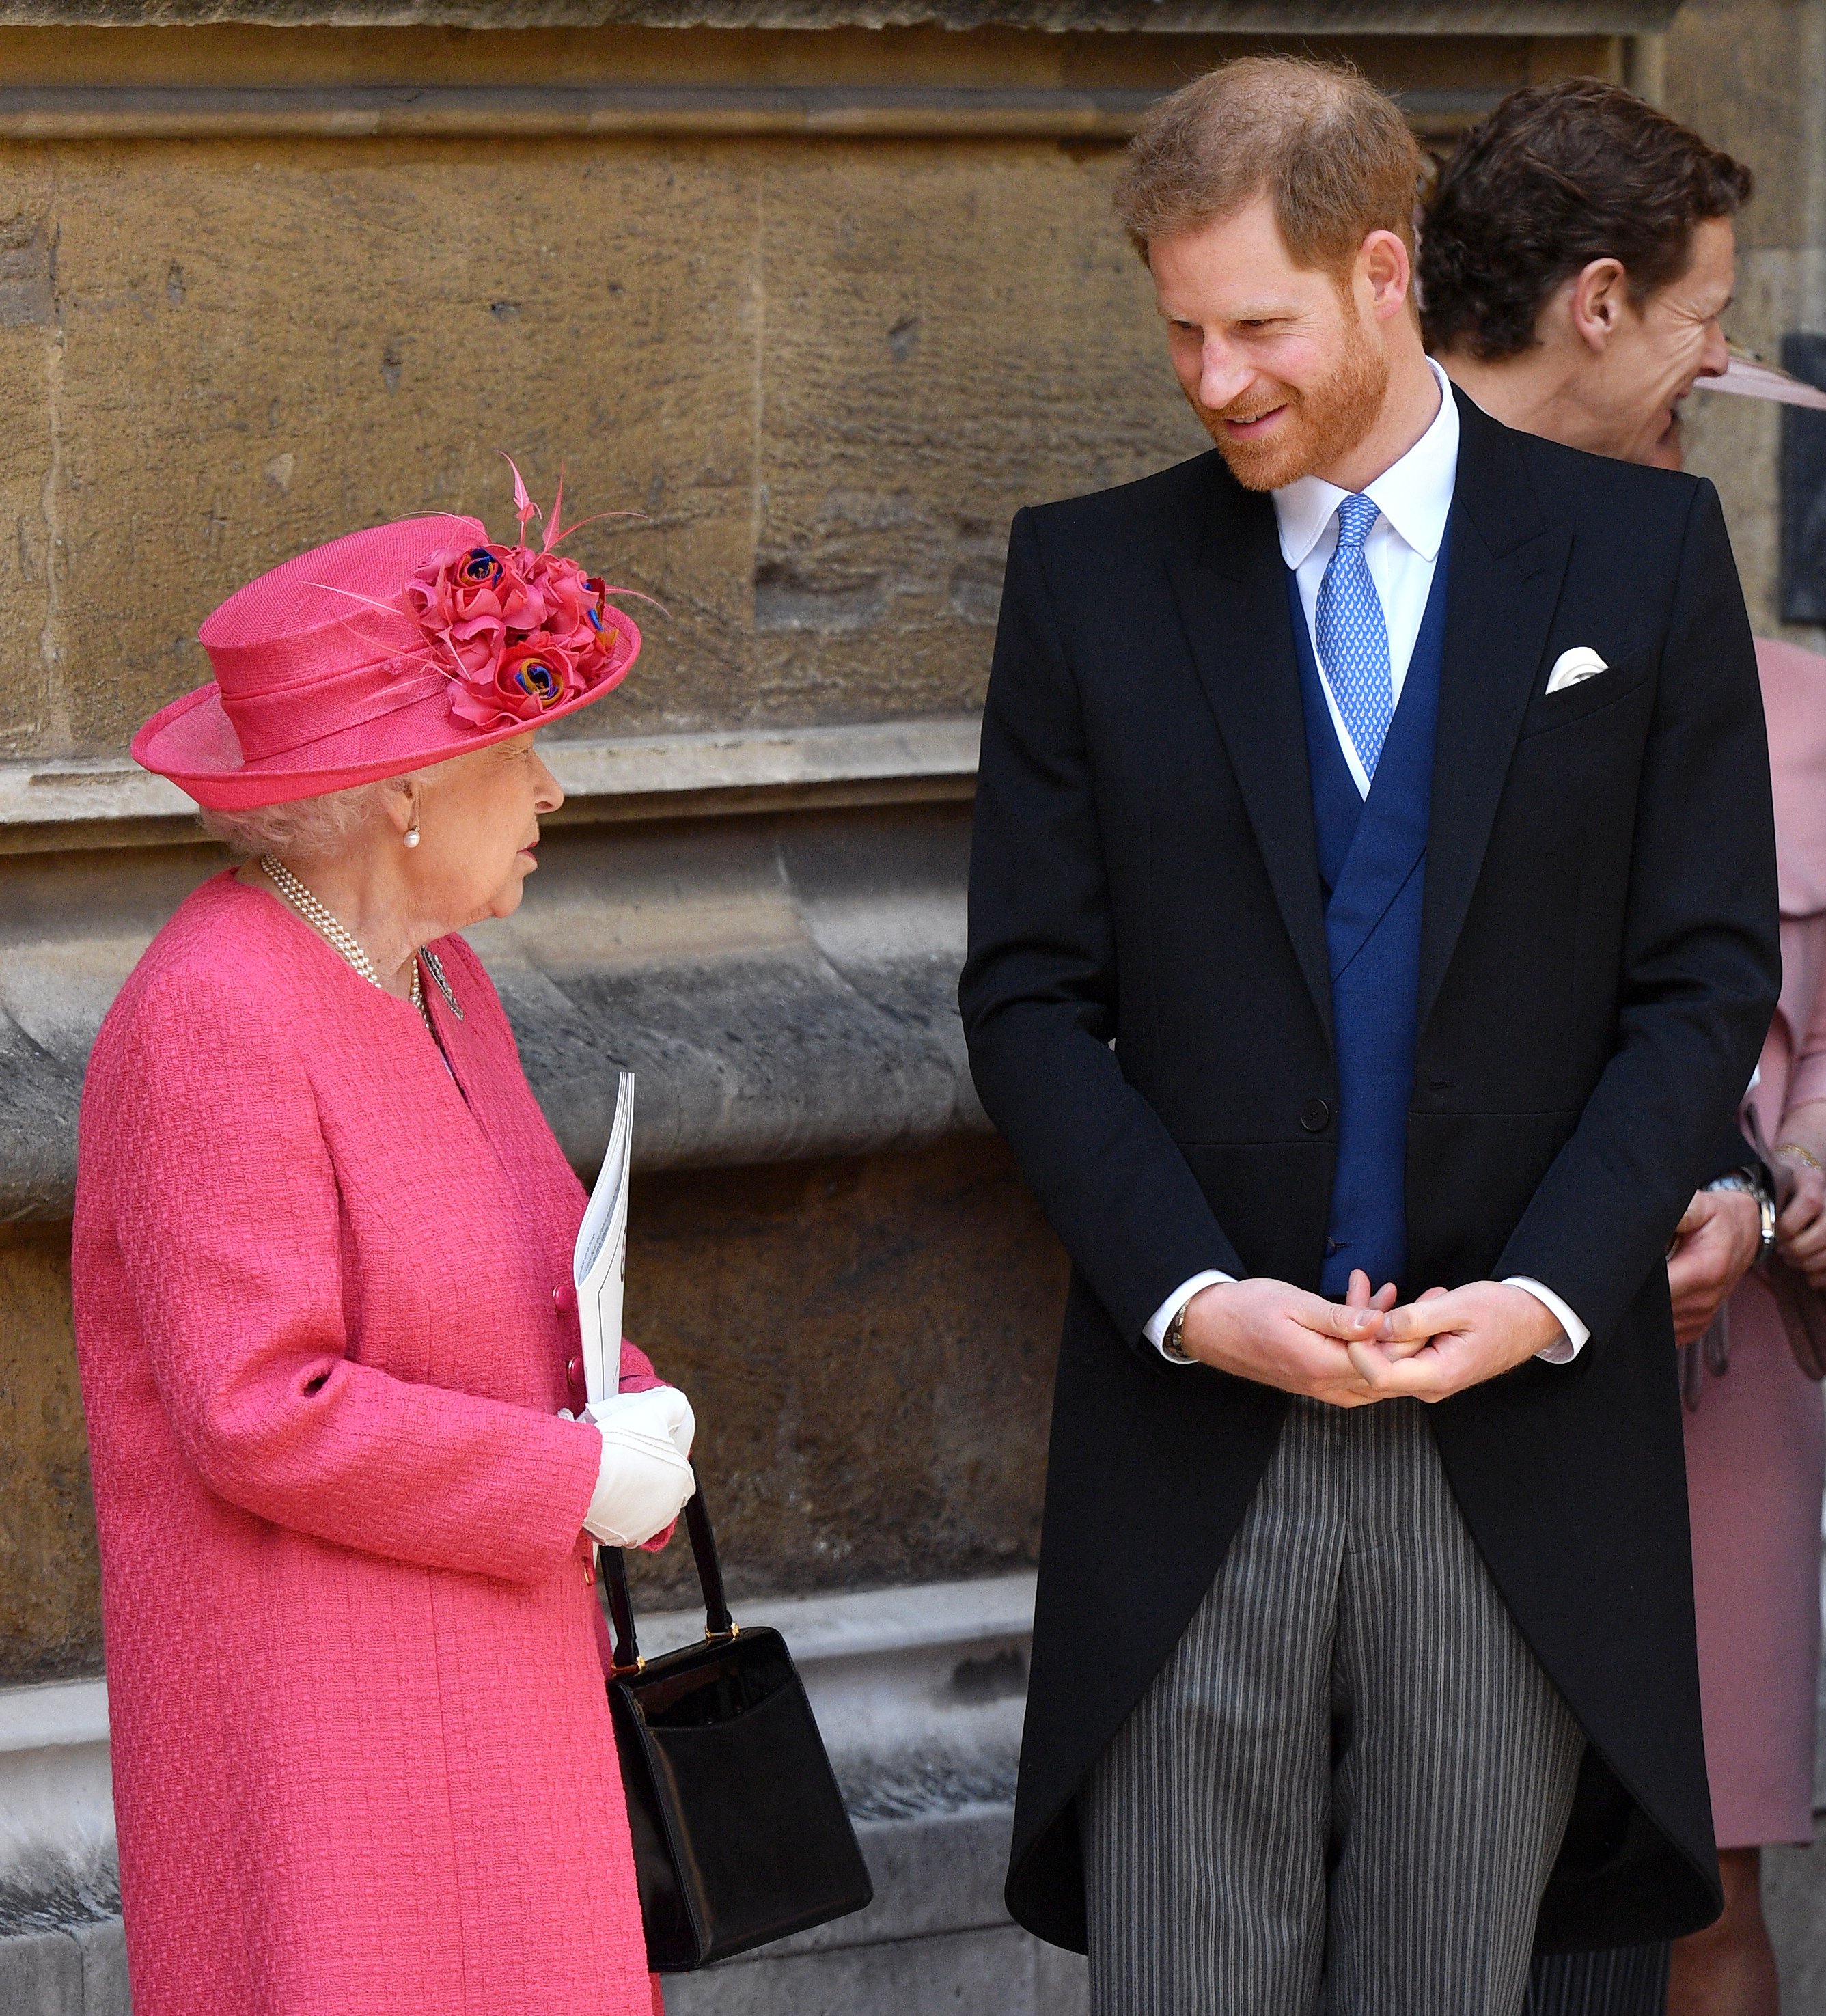 Queen Elizabeth II and Prince Harry attending the wedding of Lady Gabriella Windsor and Thomas Kingston at St George's Chapel on May 18, 2019 in Windsor, England | Source: Getty Images